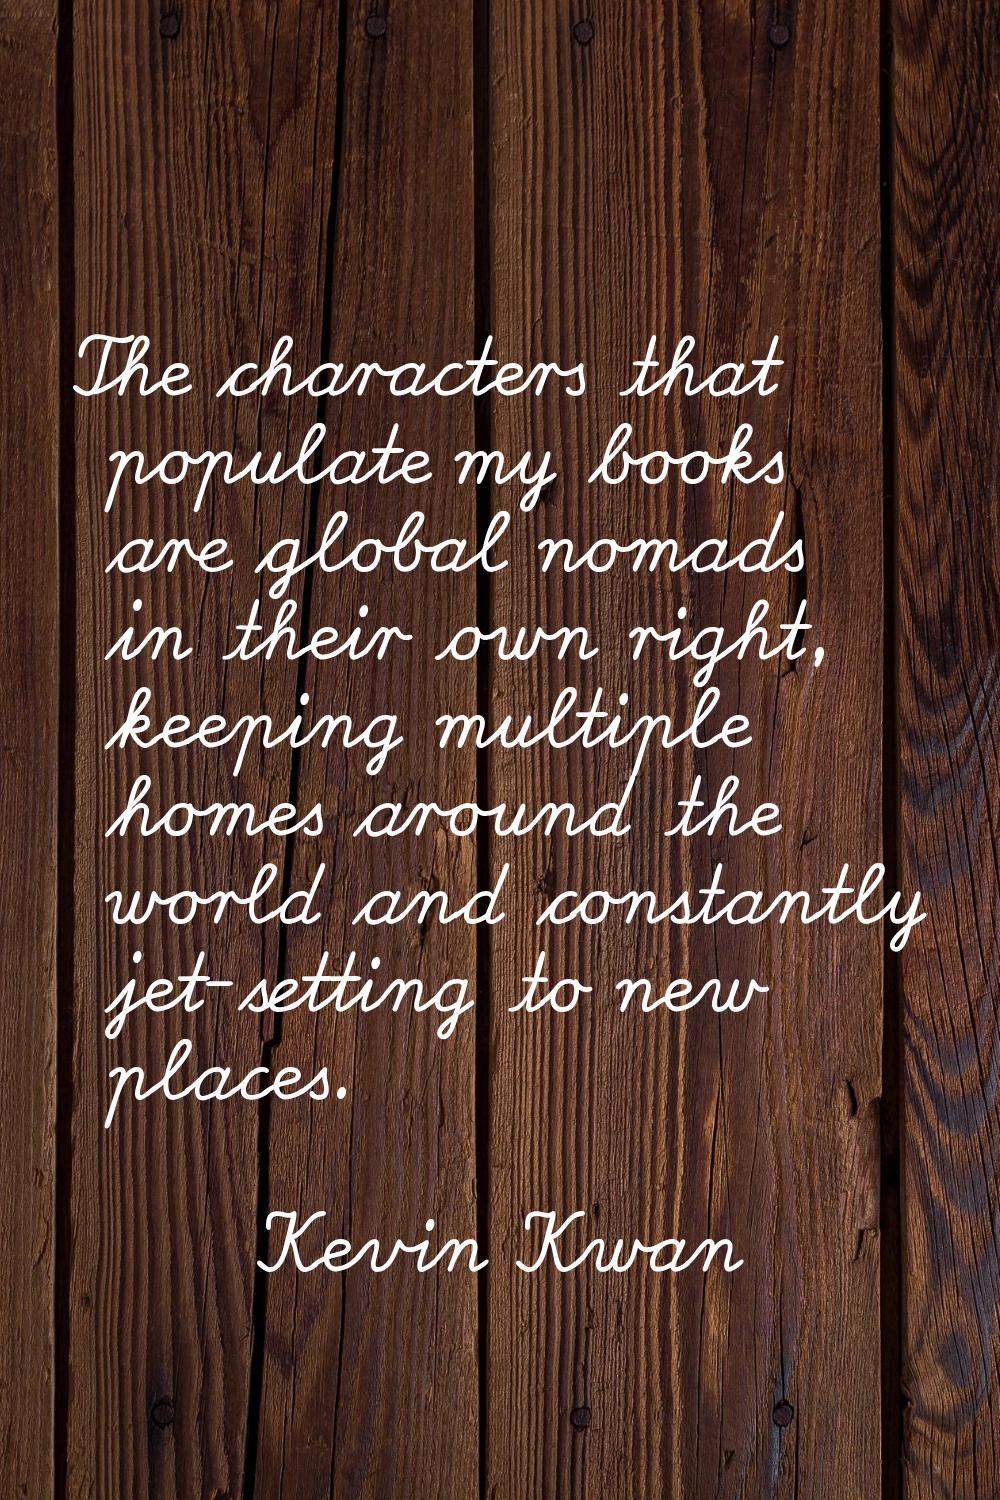 The characters that populate my books are global nomads in their own right, keeping multiple homes 